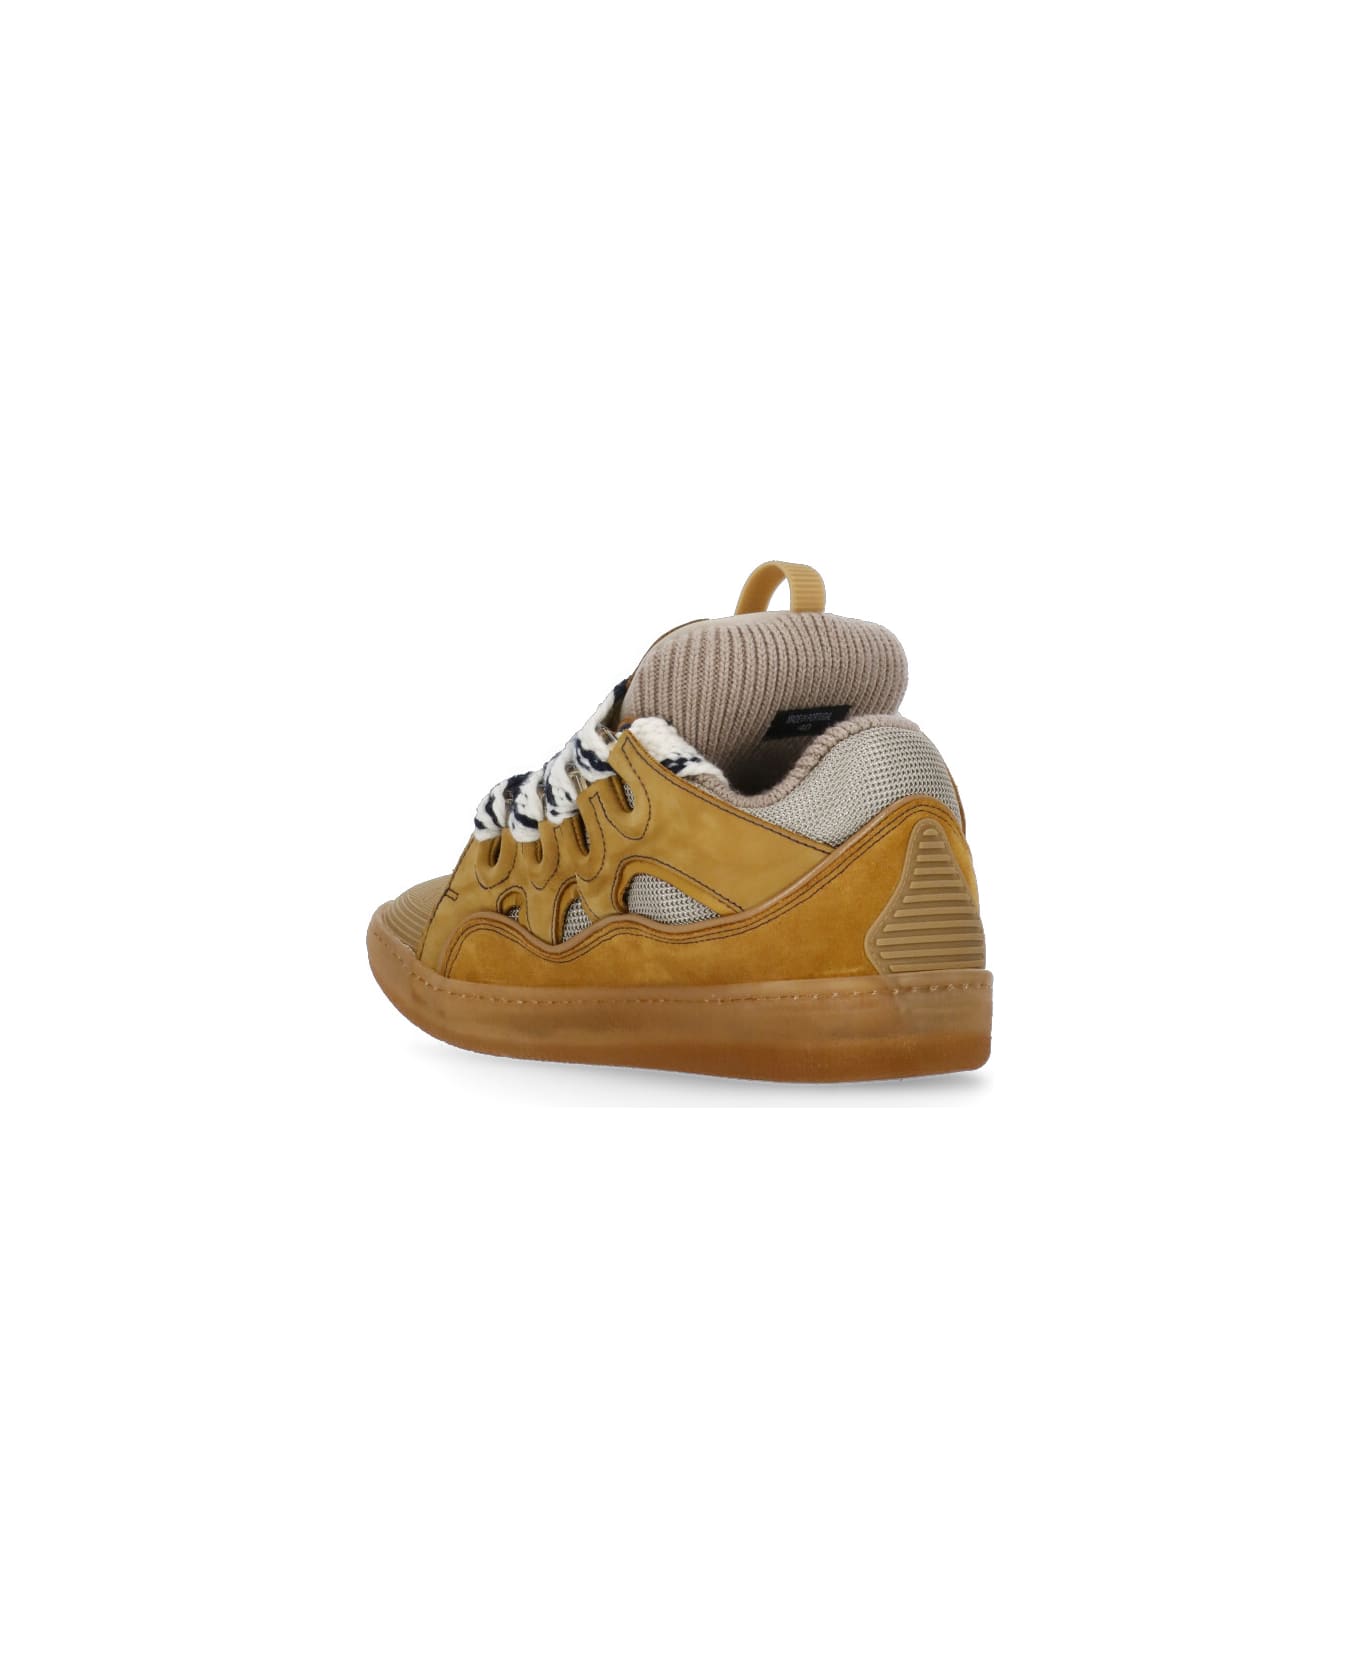 Lanvin Curb Sneakers - Yellow スニーカー